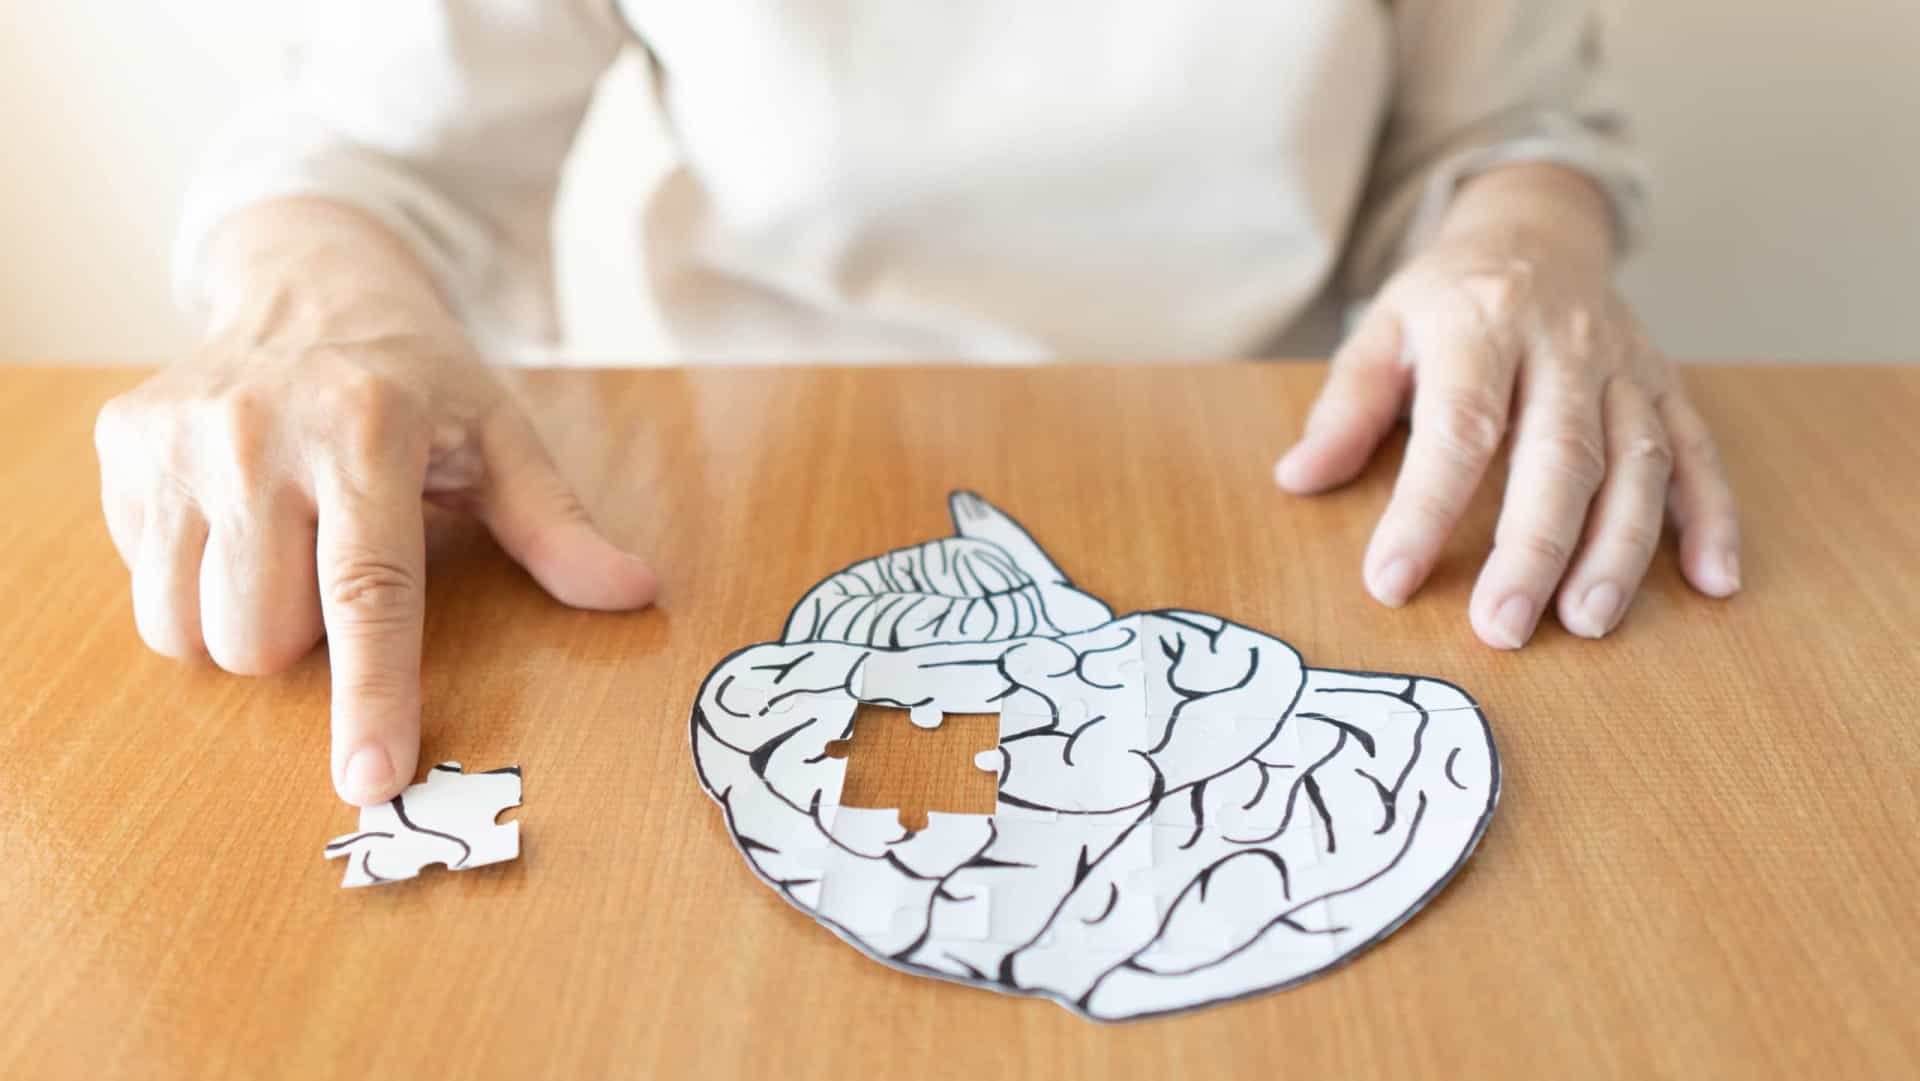 <p><span>Dementia is an umbrella term for the loss of cognitive abilities such as speech, memory, or problem-solving that impairs daily life.</span></p><p><a href="https://www.msn.com/en-us/community/channel/vid-7xx8mnucu55yw63we9va2gwr7uihbxwc68fxqp25x6tg4ftibpra?cvid=94631541bc0f4f89bfd59158d696ad7e">Follow us and access great exclusive content everyday</a></p>